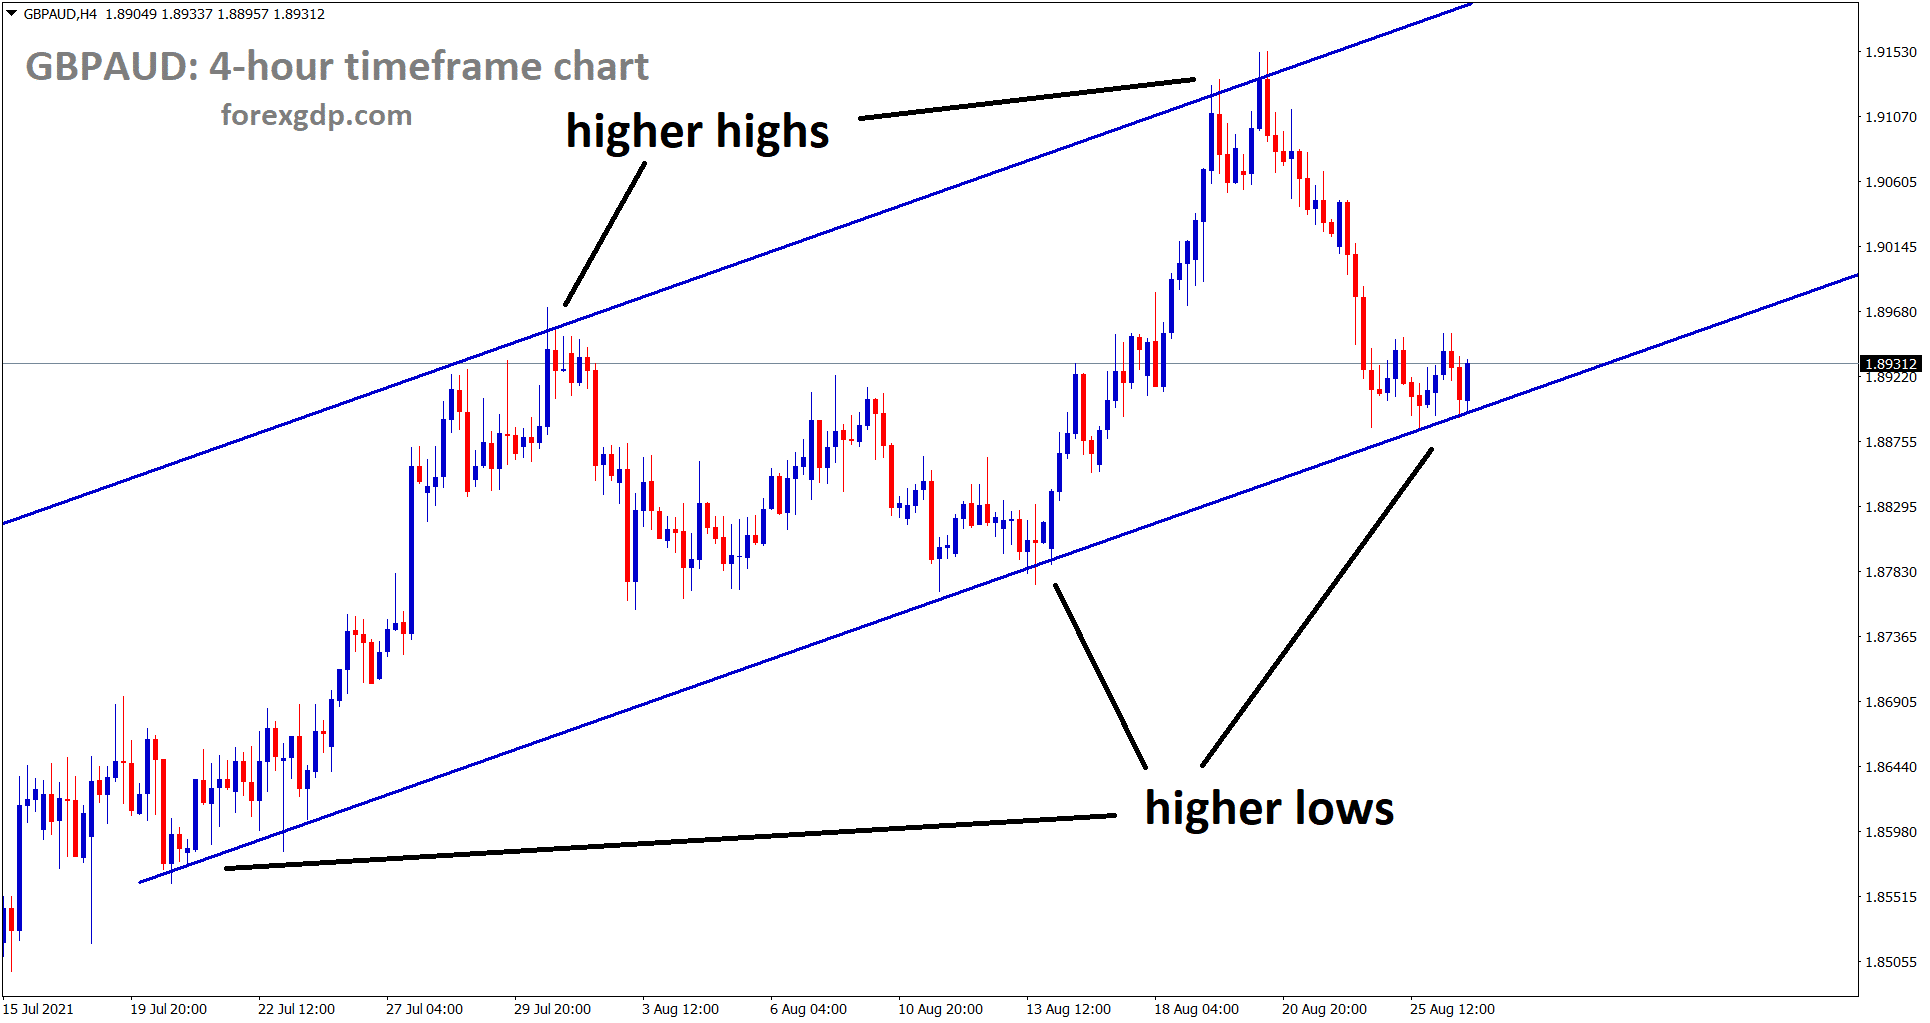 GBPAUD hits the higher low area of the uptrend line